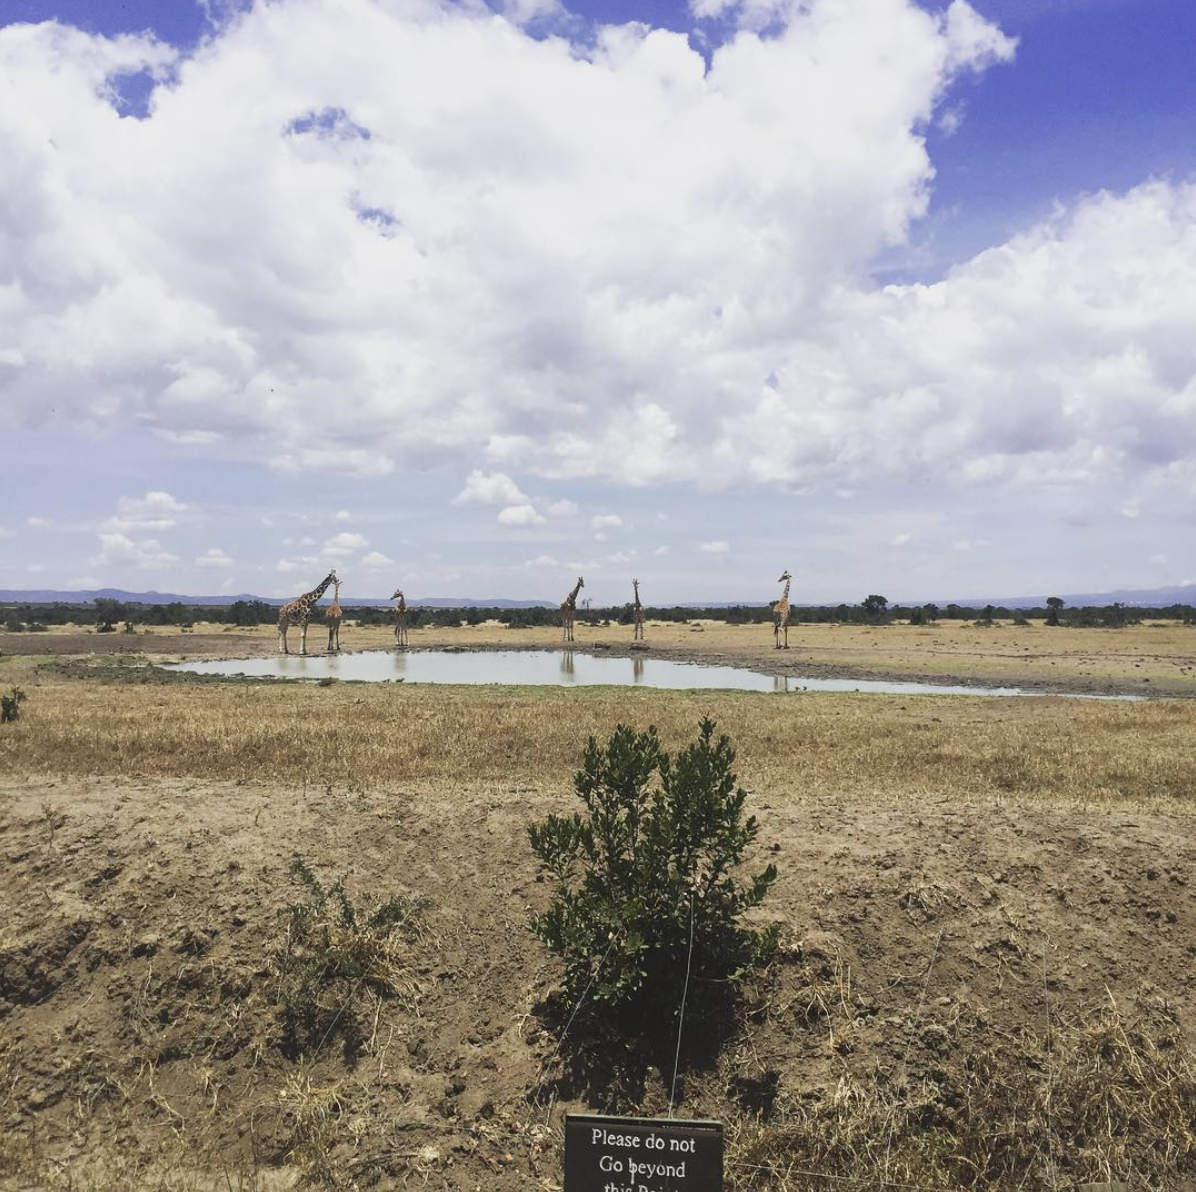 Wide open spaces and wildlife in the Ol Pejeta Conservancy